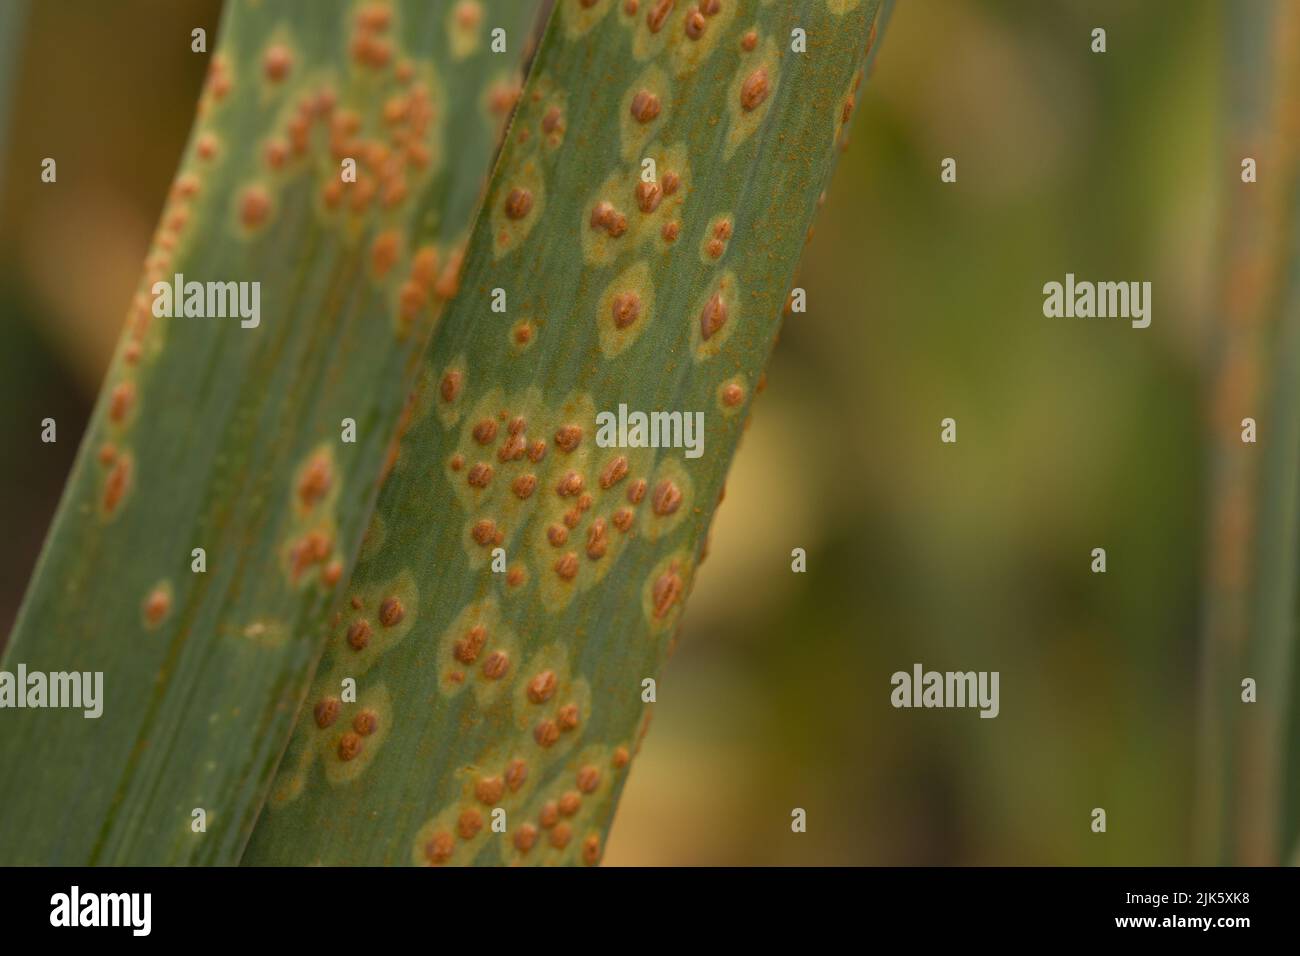 Garlic leaves affected by leaf rust Stock Photo